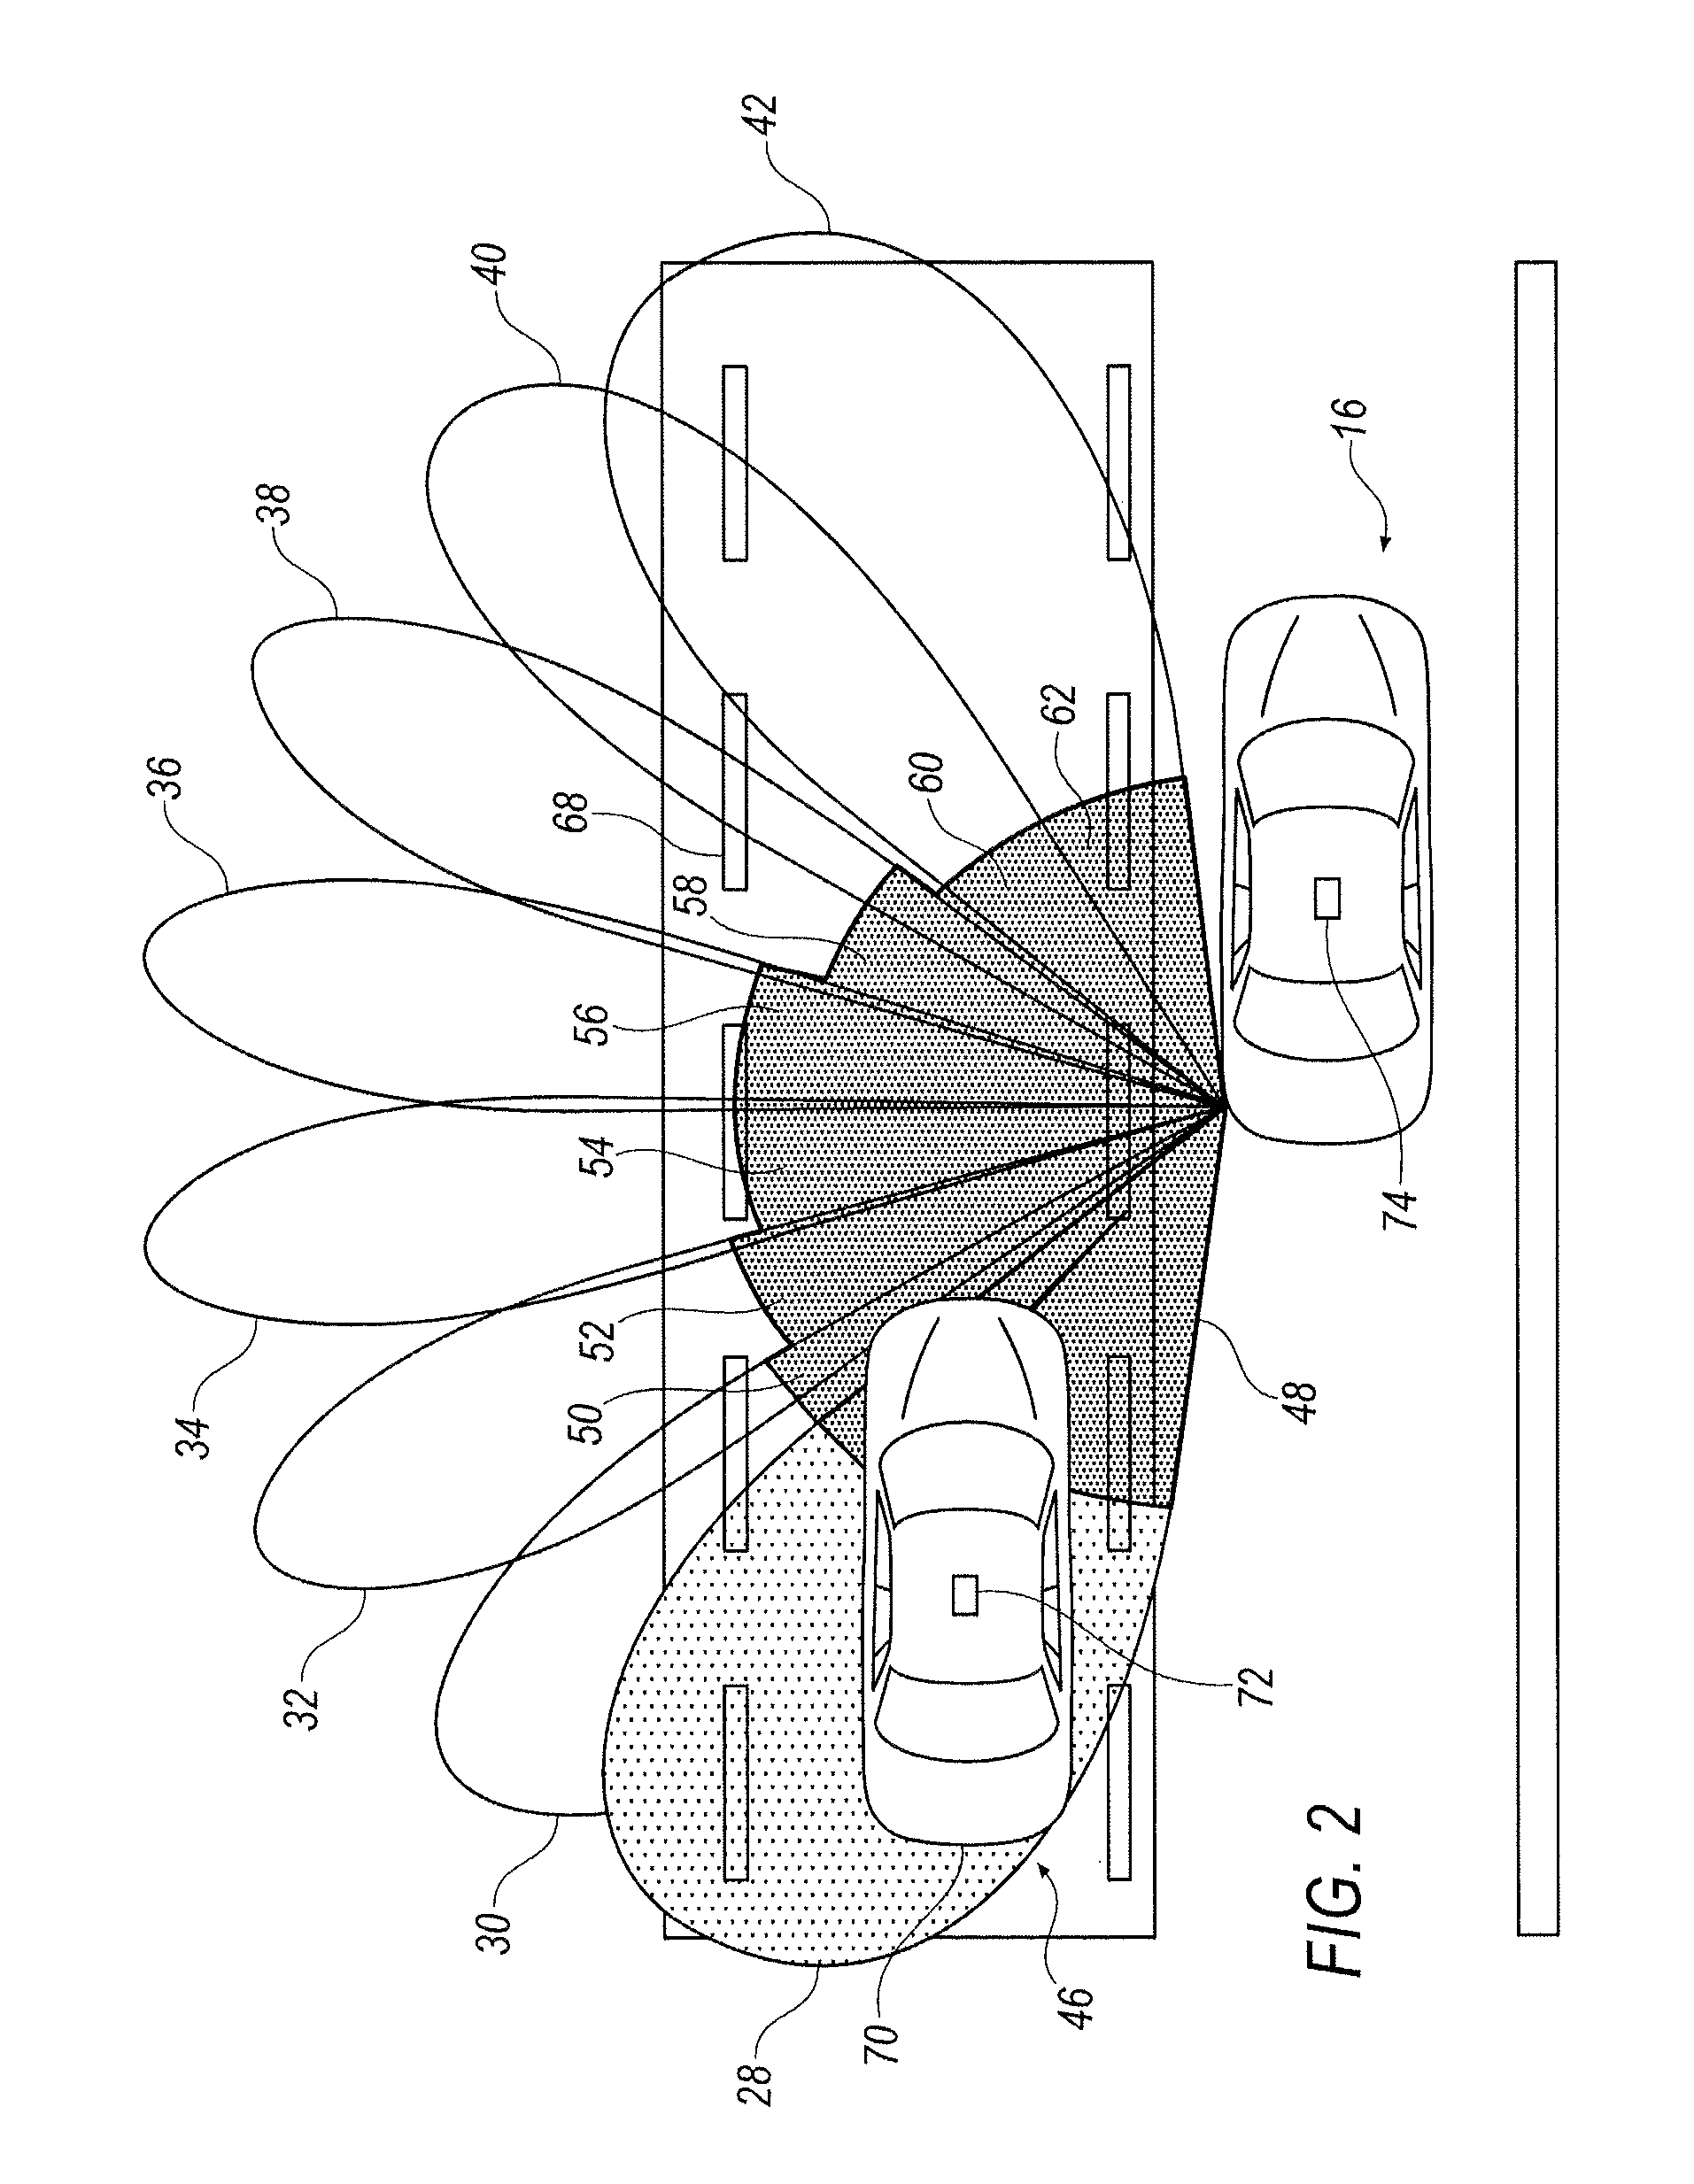 System, apparatus and method for active mirrors with blind spot detection